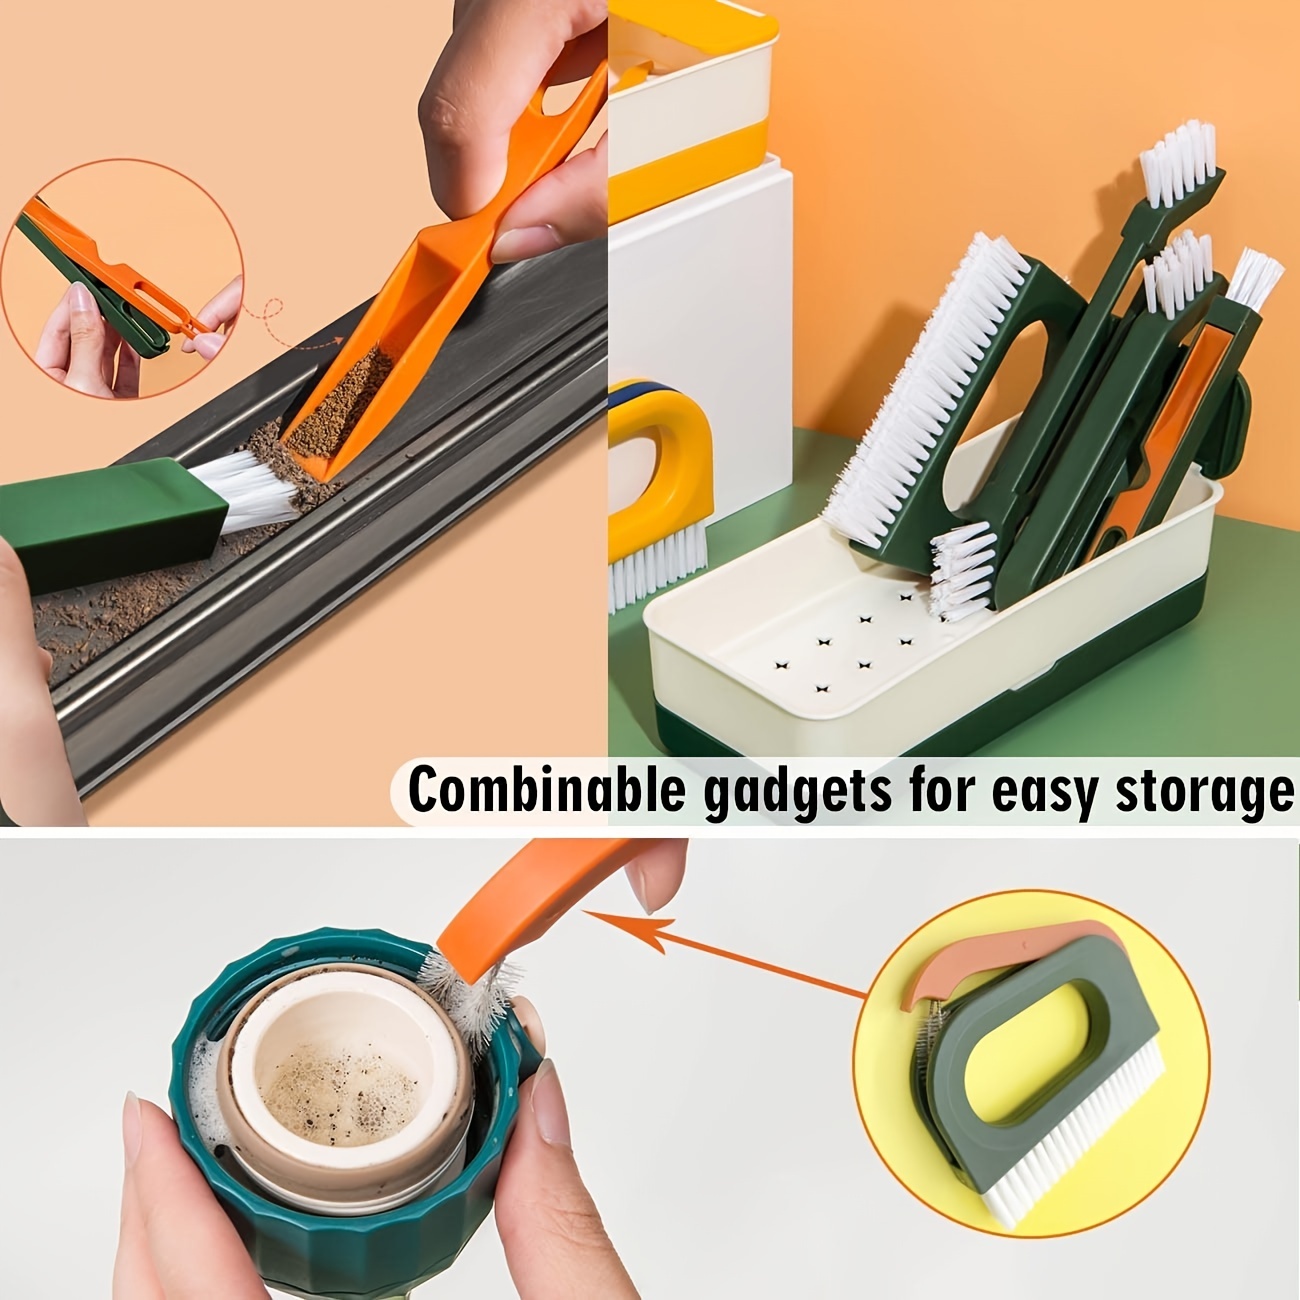 Crevice Cleaning Brushes Tool kit Small Cleaning Brush for House Cleaning  Disposable Toilet Brush Deep Cleaning Brush Gap for Gap Corner of Stove  Hard